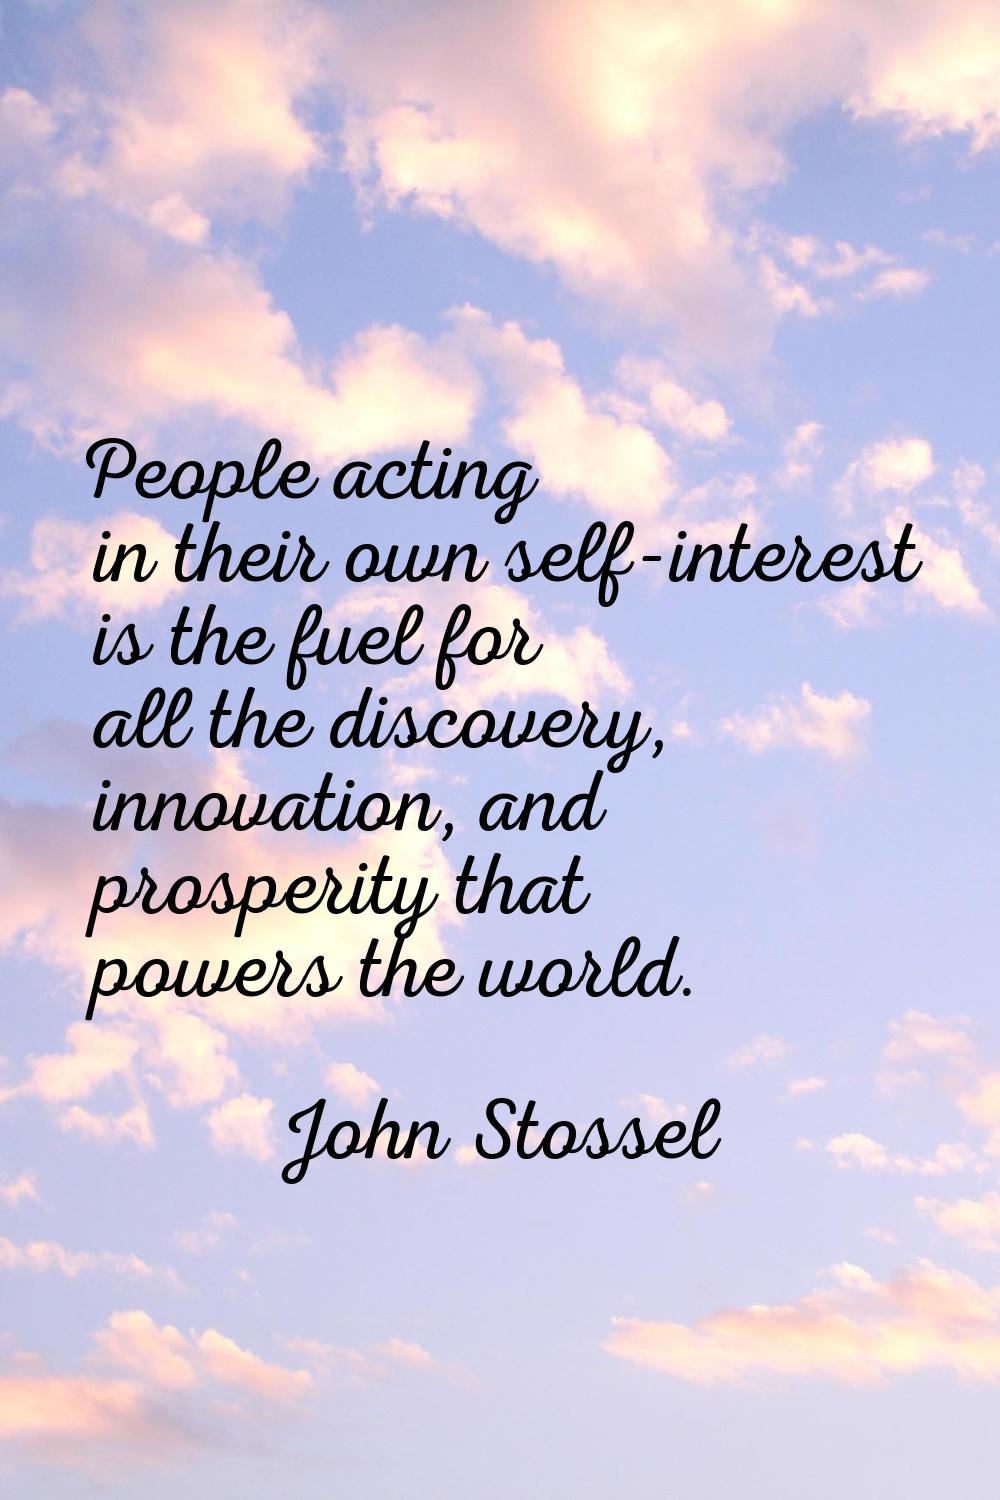 People acting in their own self-interest is the fuel for all the discovery, innovation, and prosper